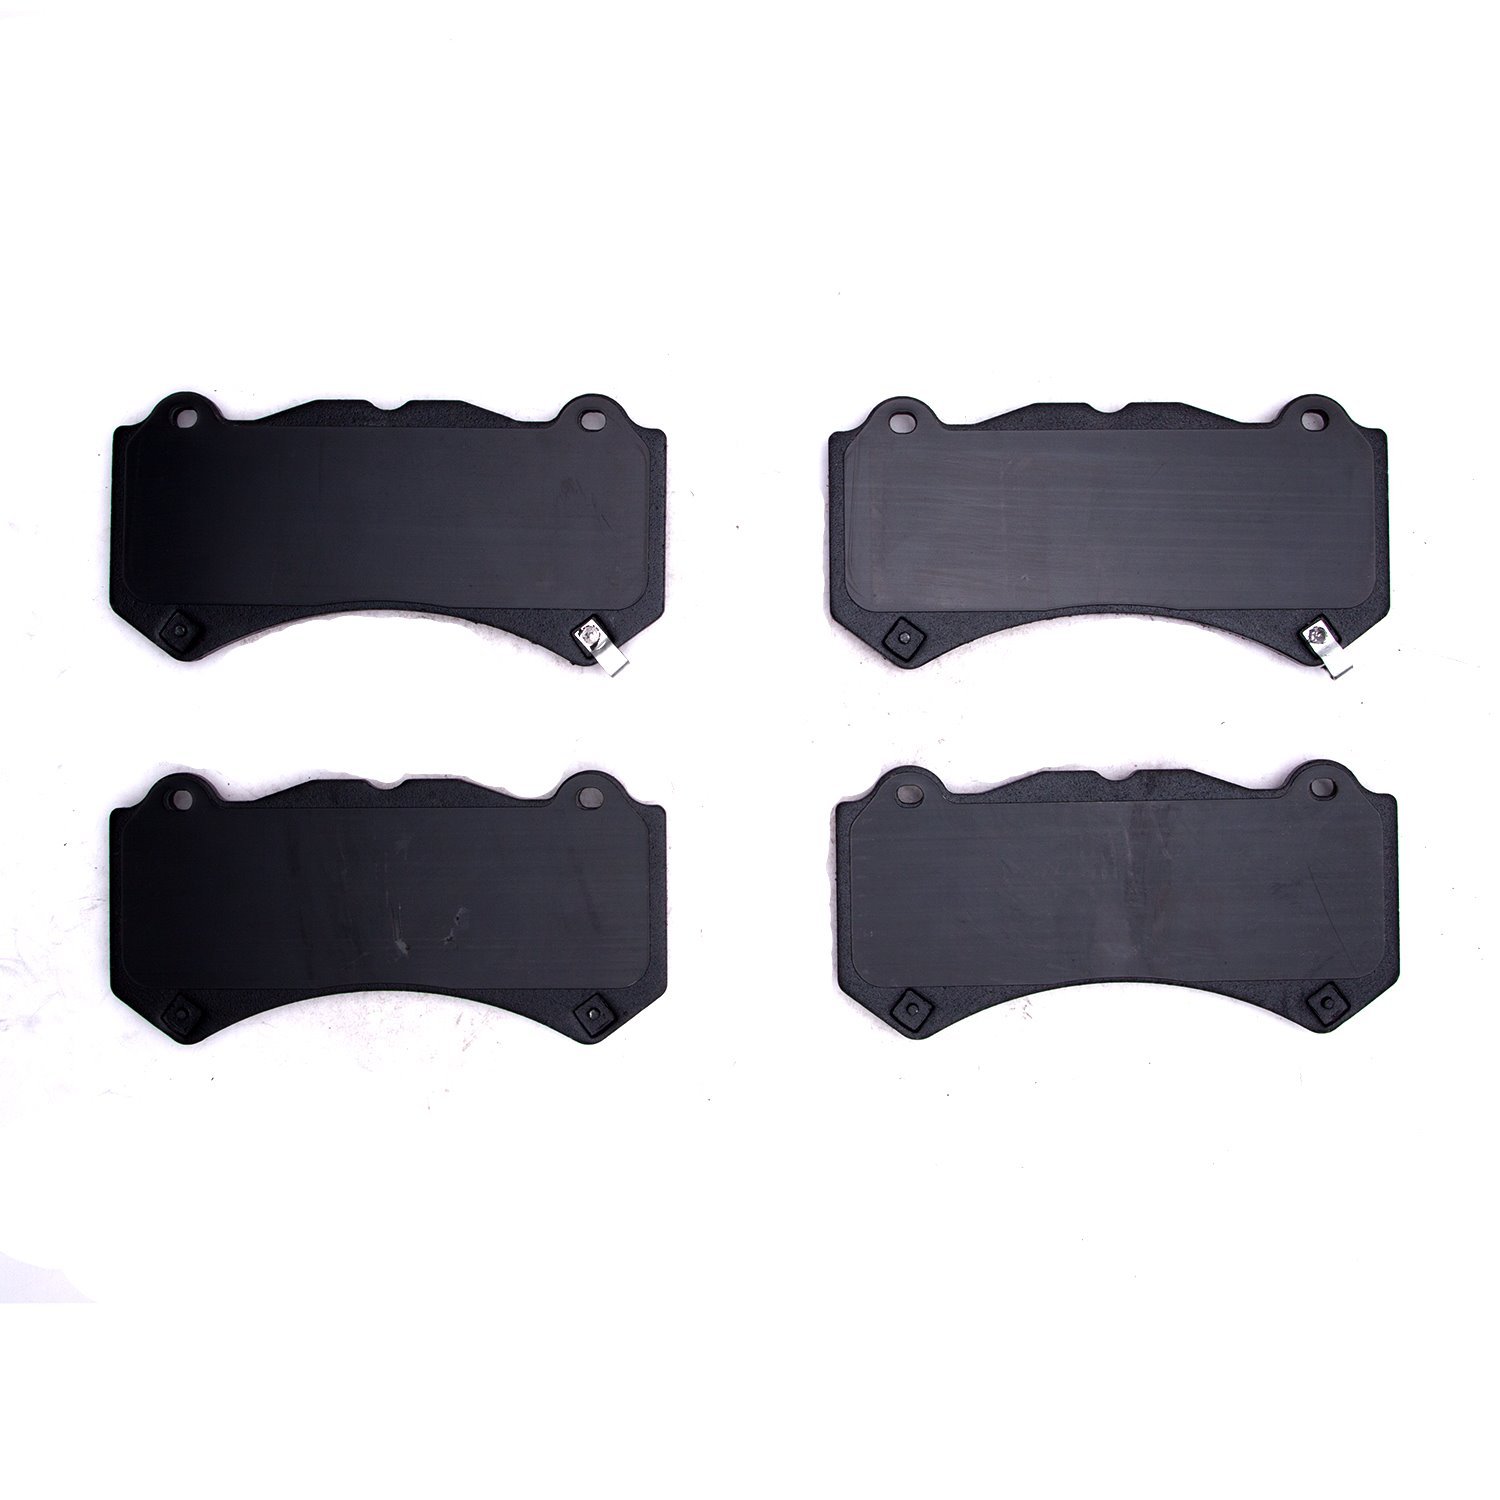 1115-1405-00 Active Performance Low-Metallic Brake Pads, Fits Select Multiple Makes/Models, Position: Front